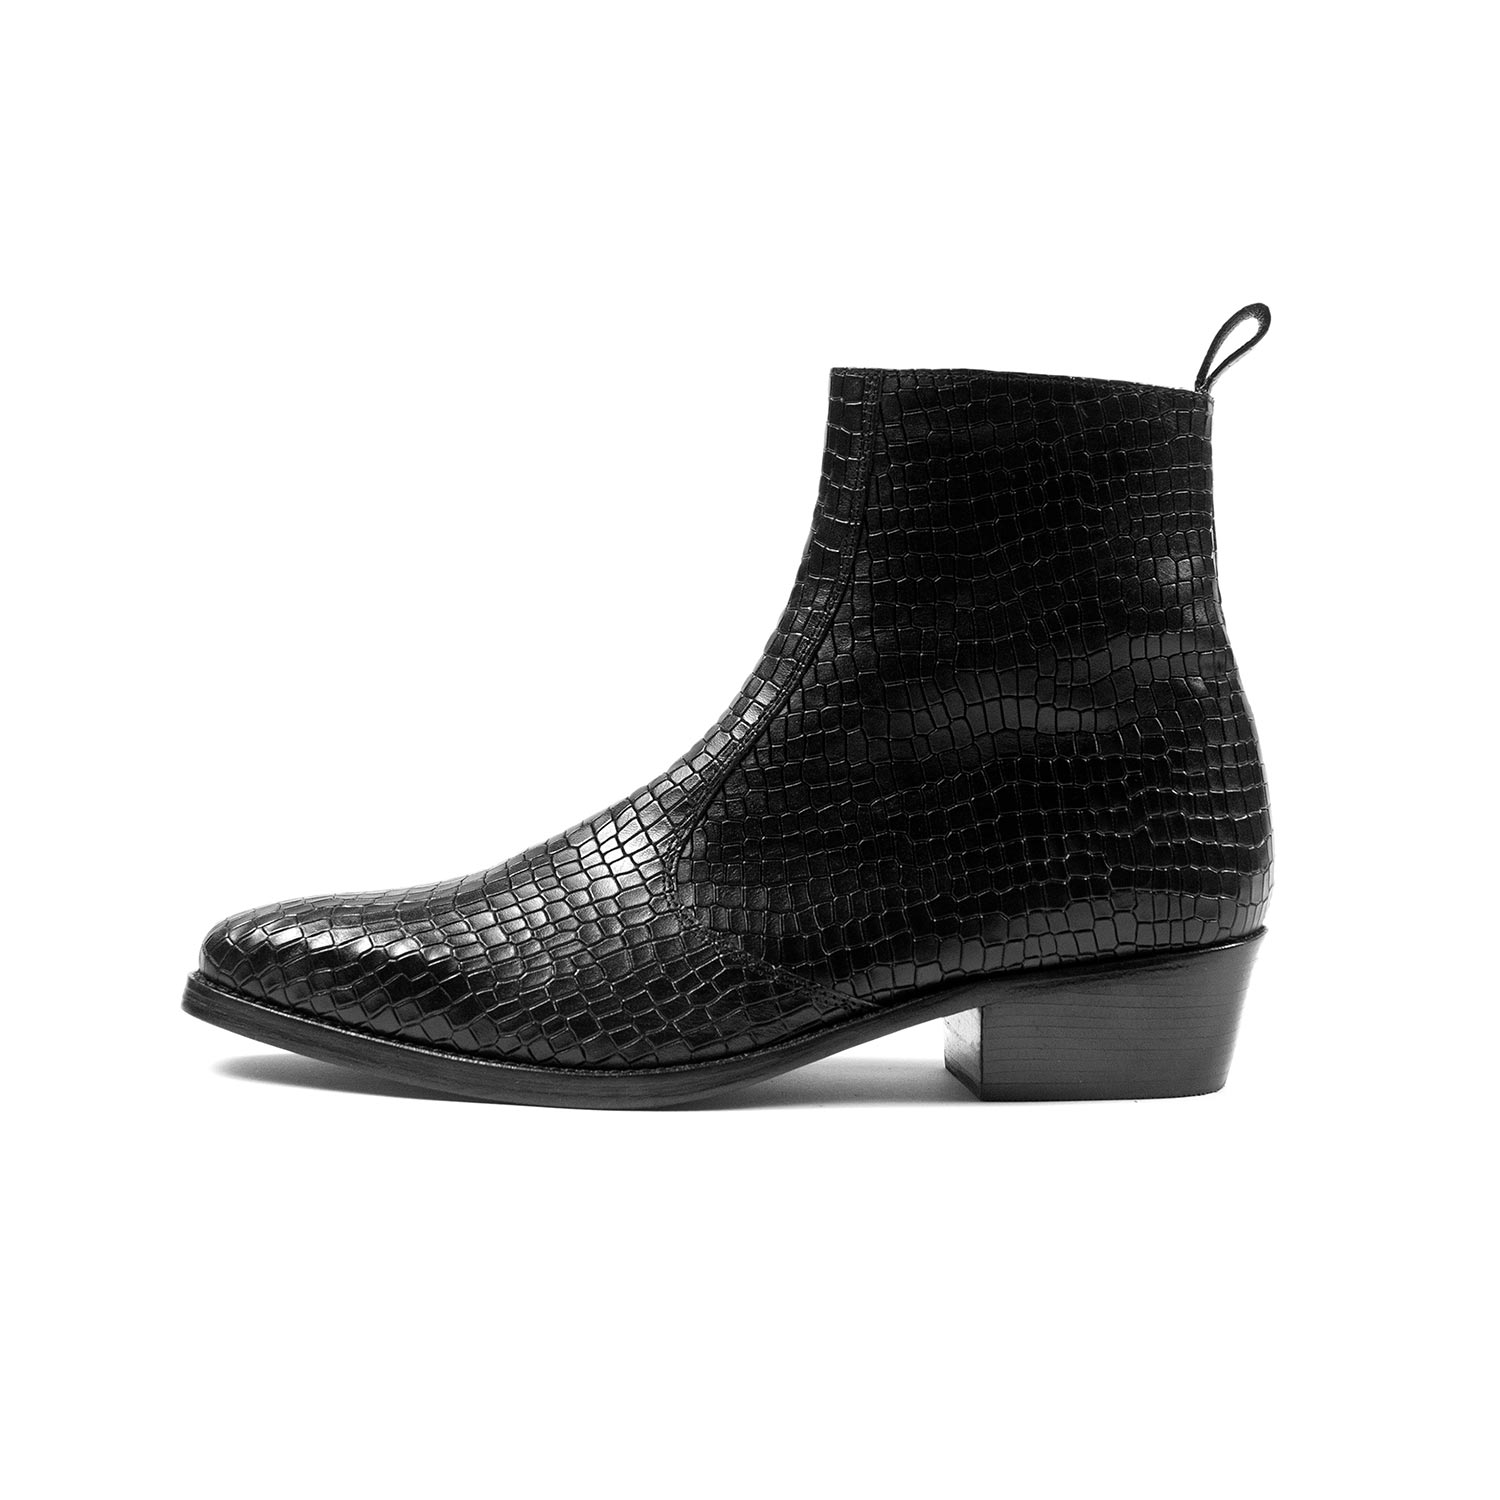 Richards - Black Snakeskin (Size 7, 7.5, 14) | Straight To Hell Apparel